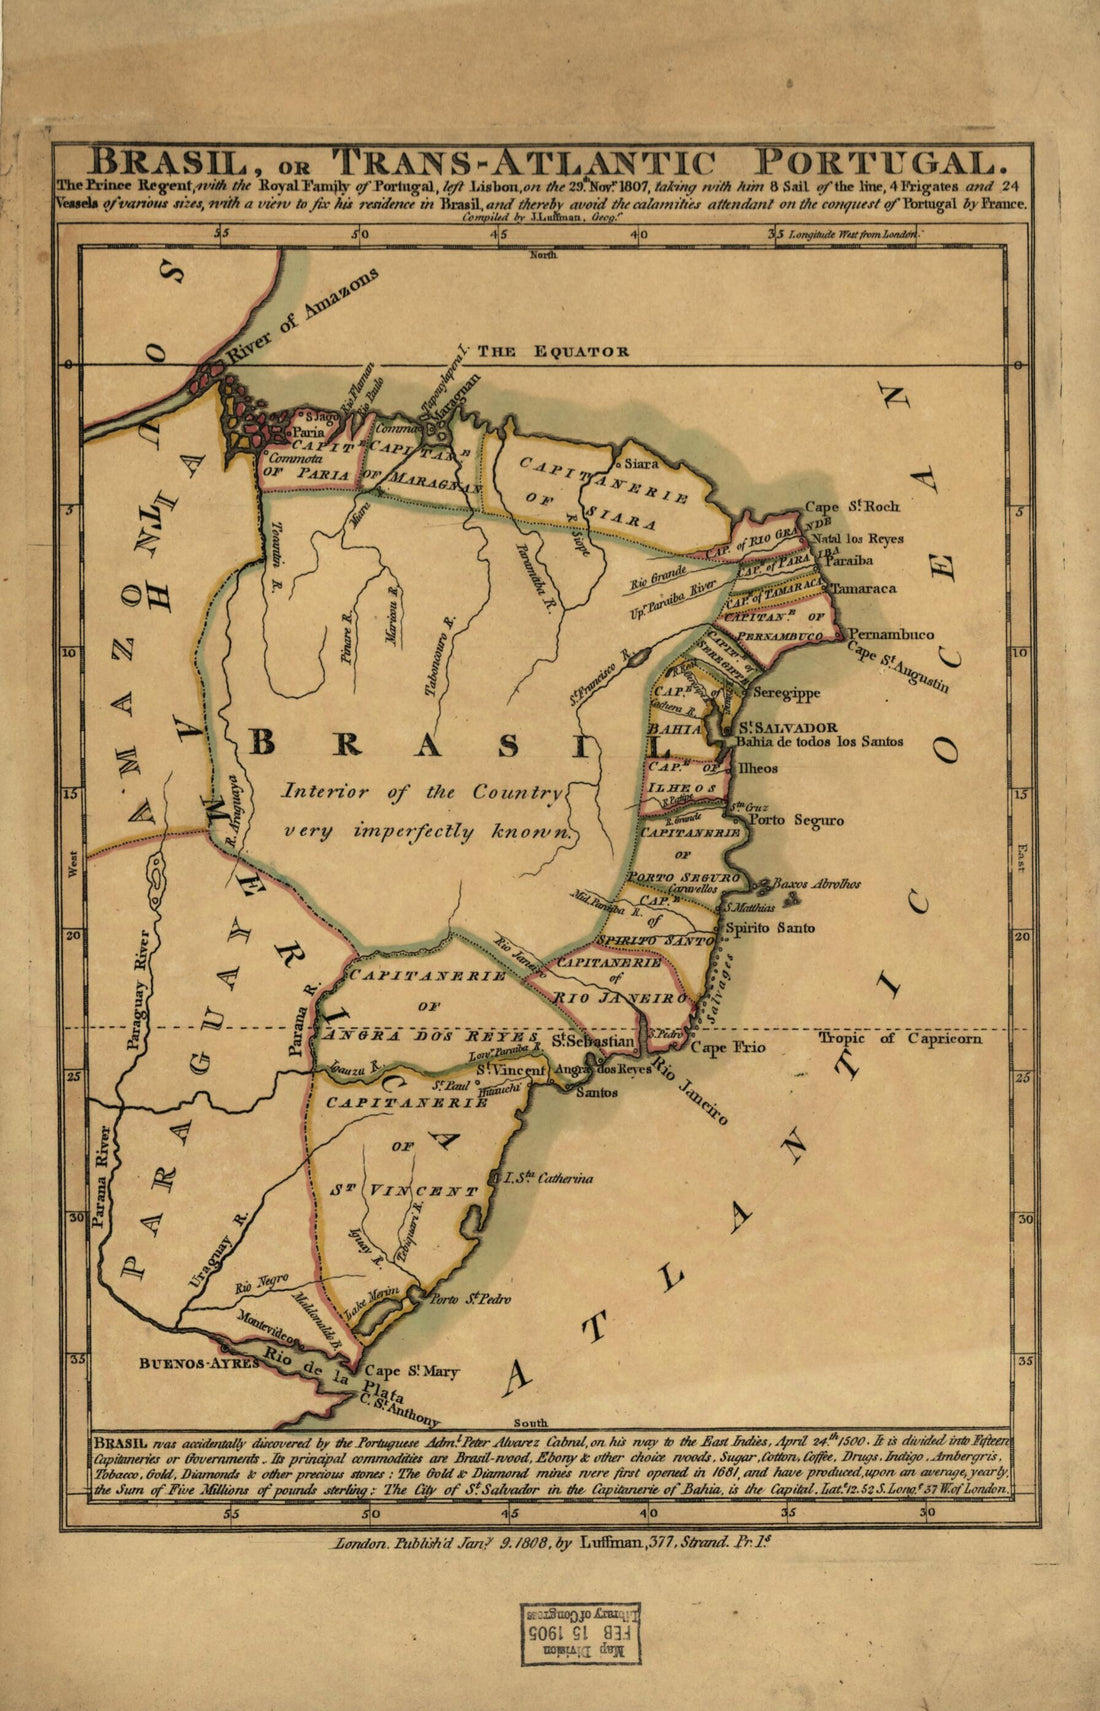 This old map of Atlantic Portugal from 1808 was created by J. (John) Luffman in 1808